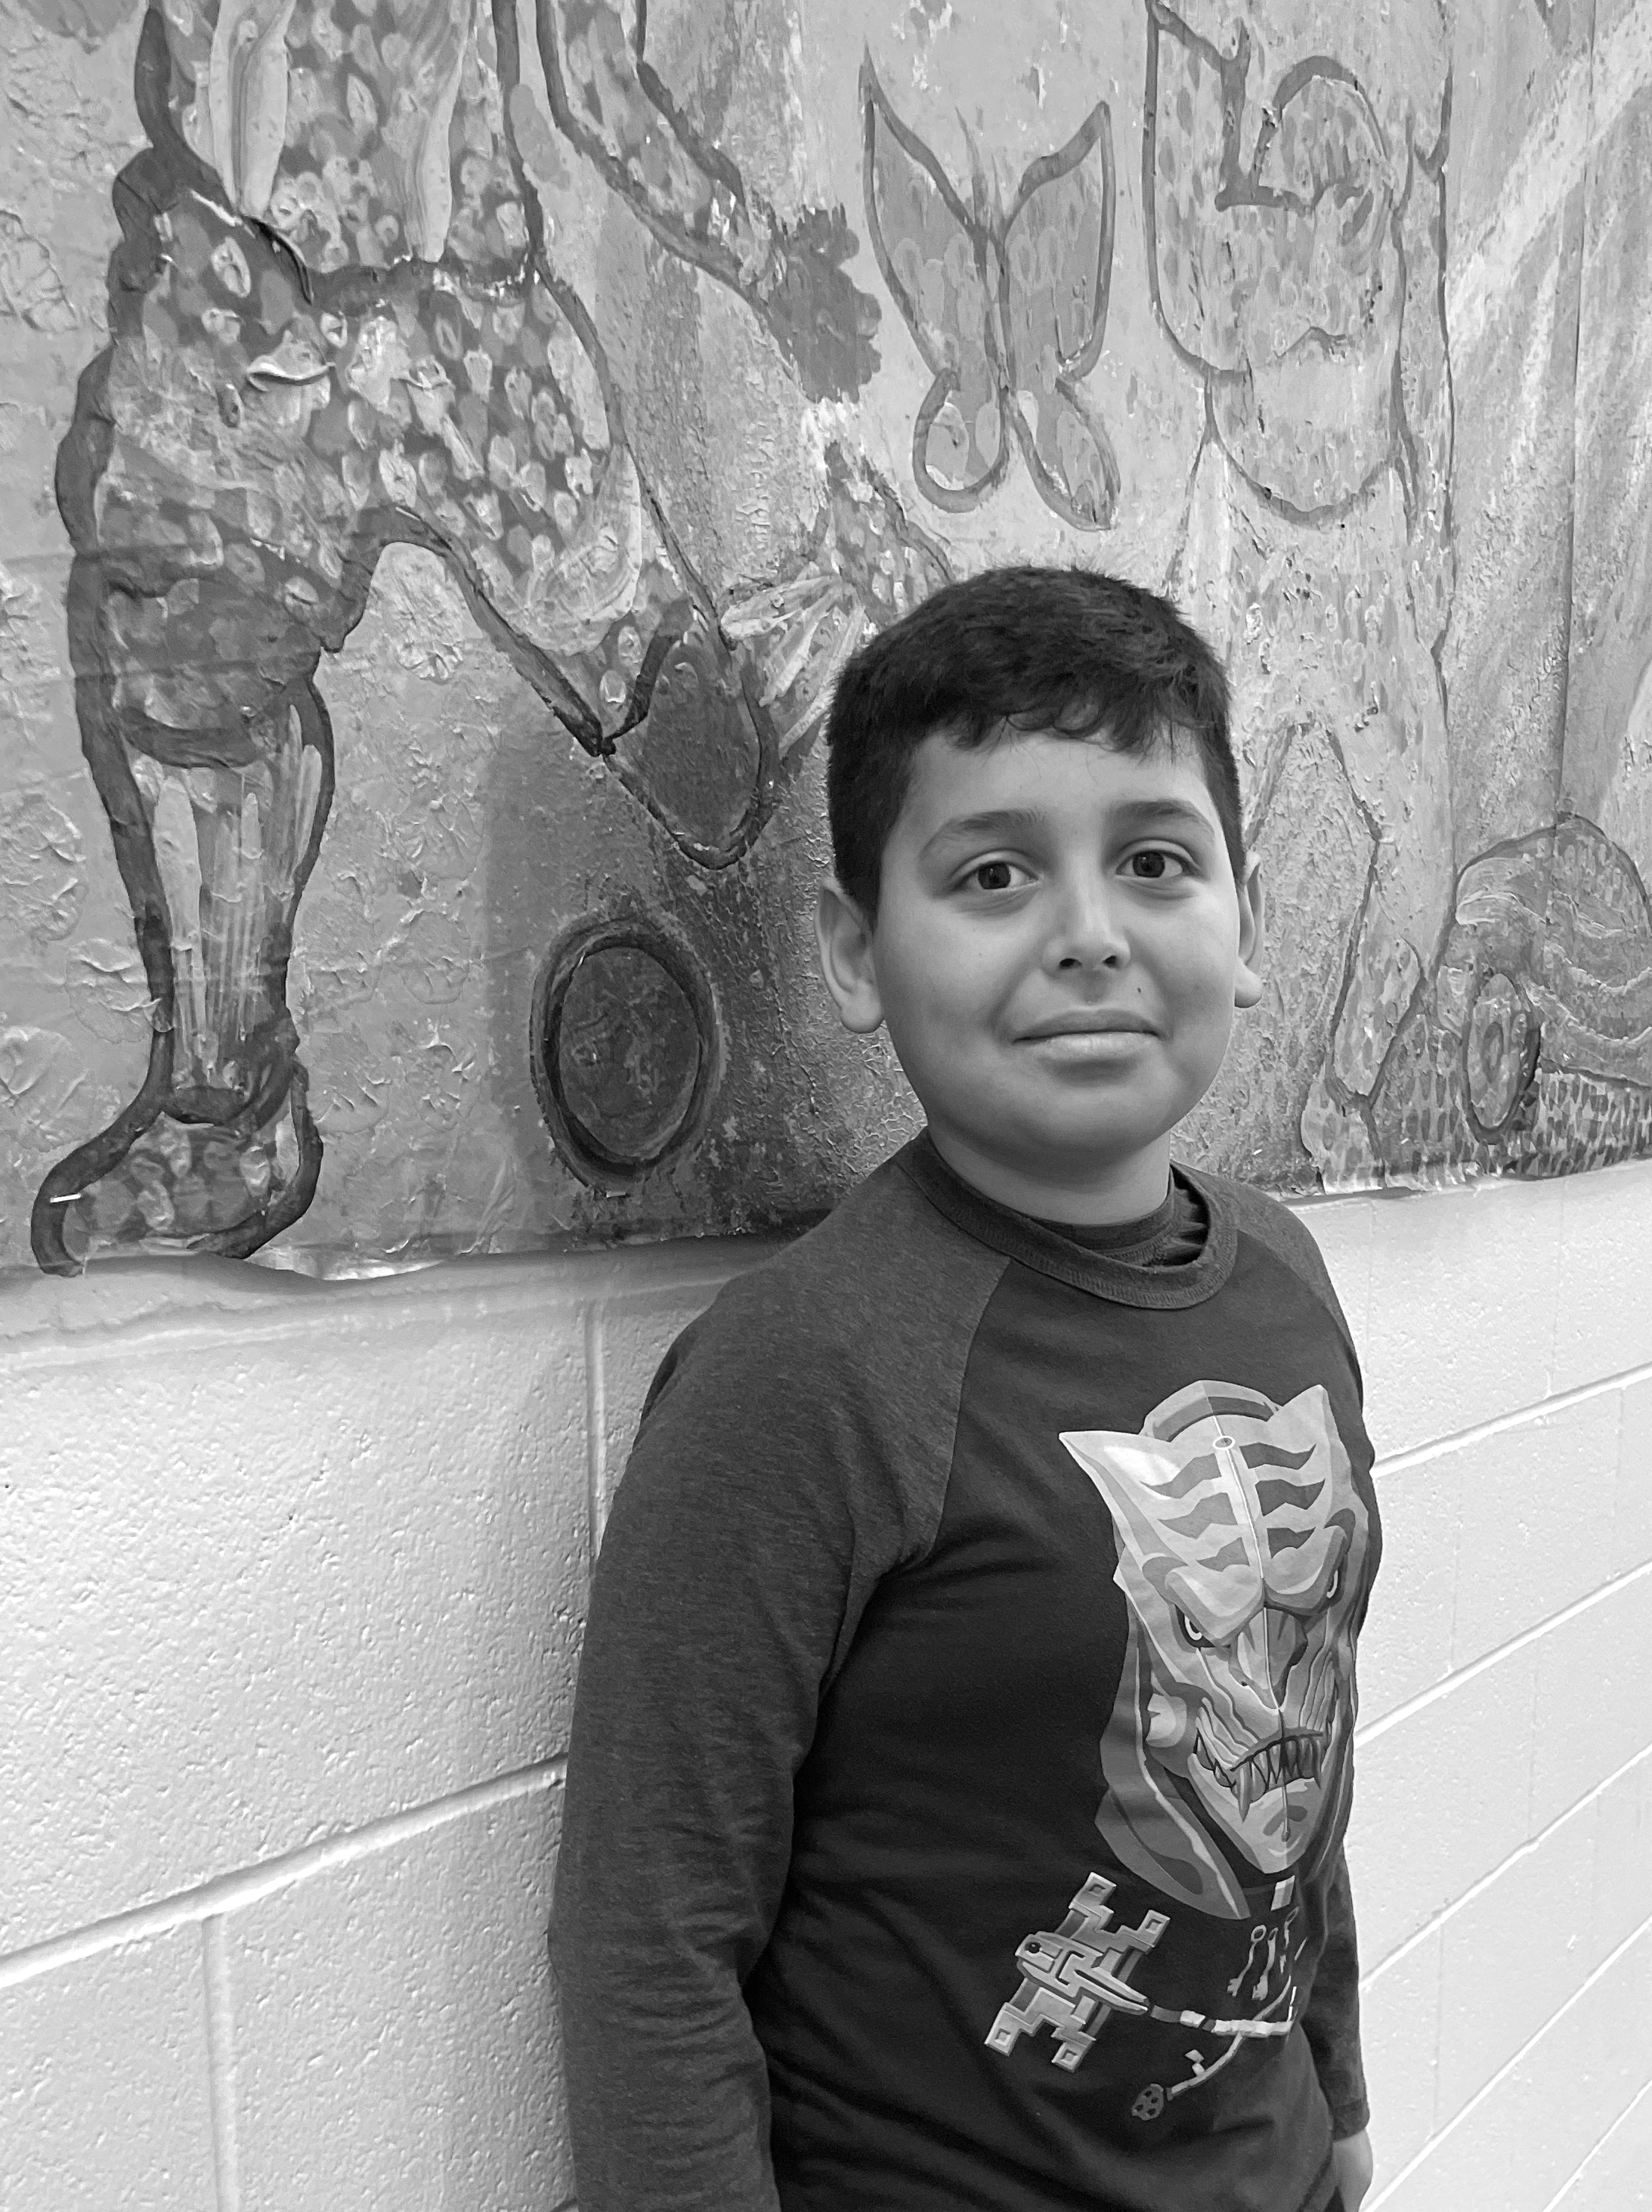 Rafael, a fifth grade student at Fruit Valley Elementary School